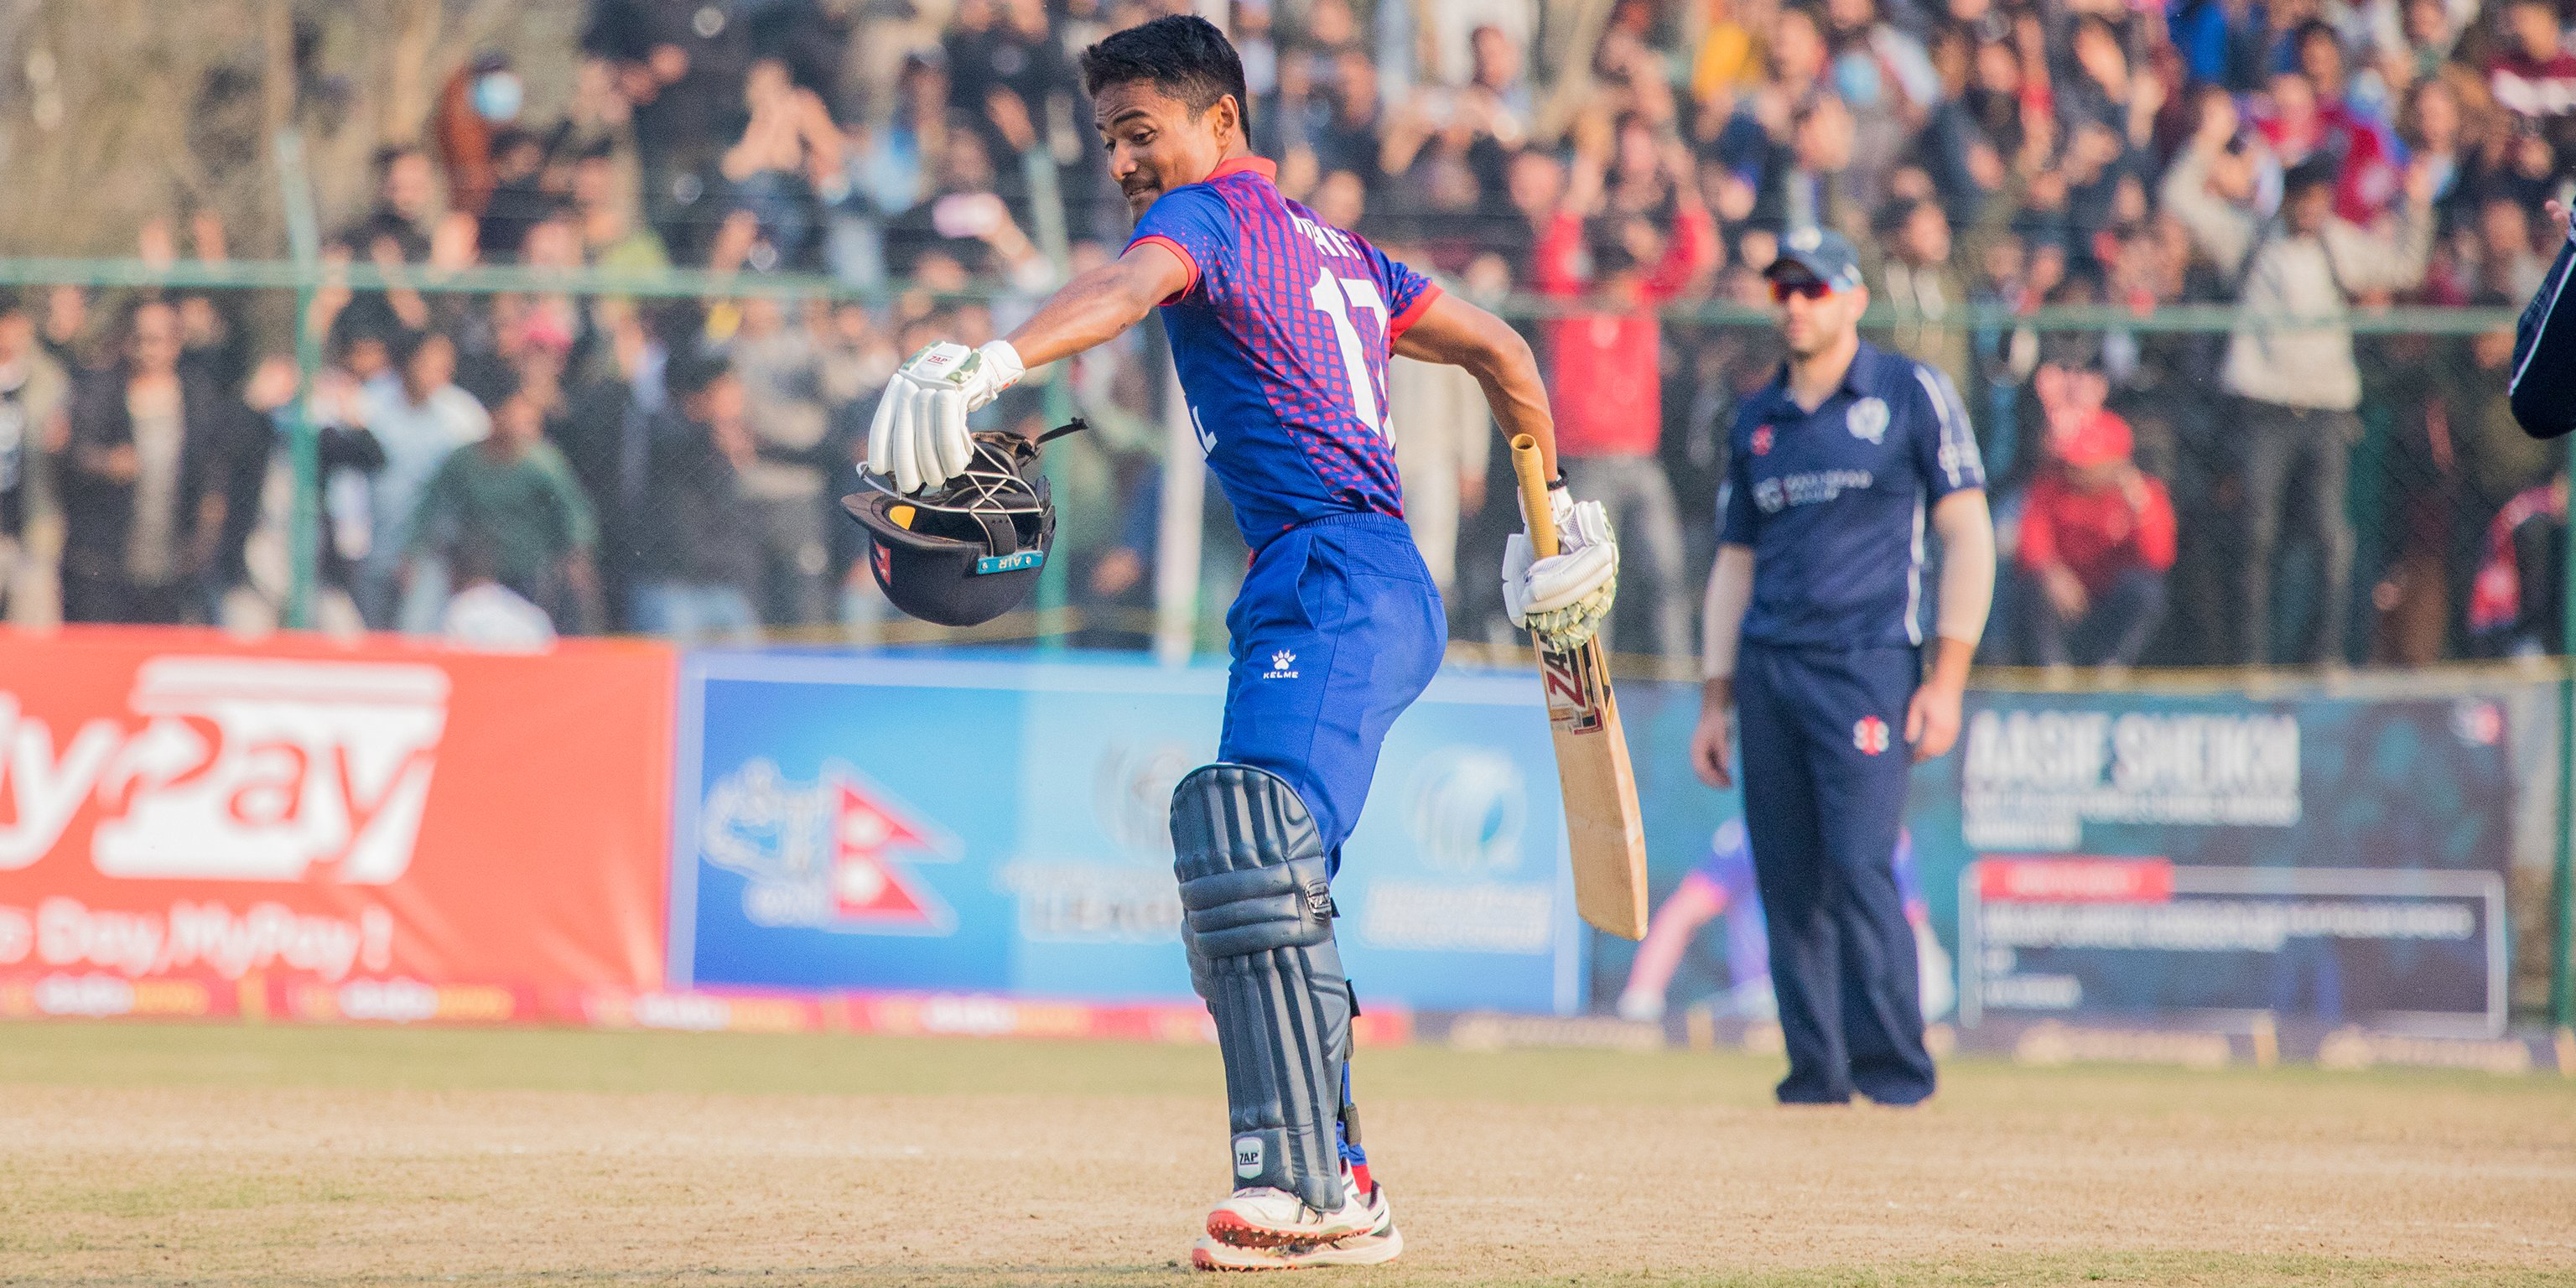 Home crowd helped us to win: Poudel